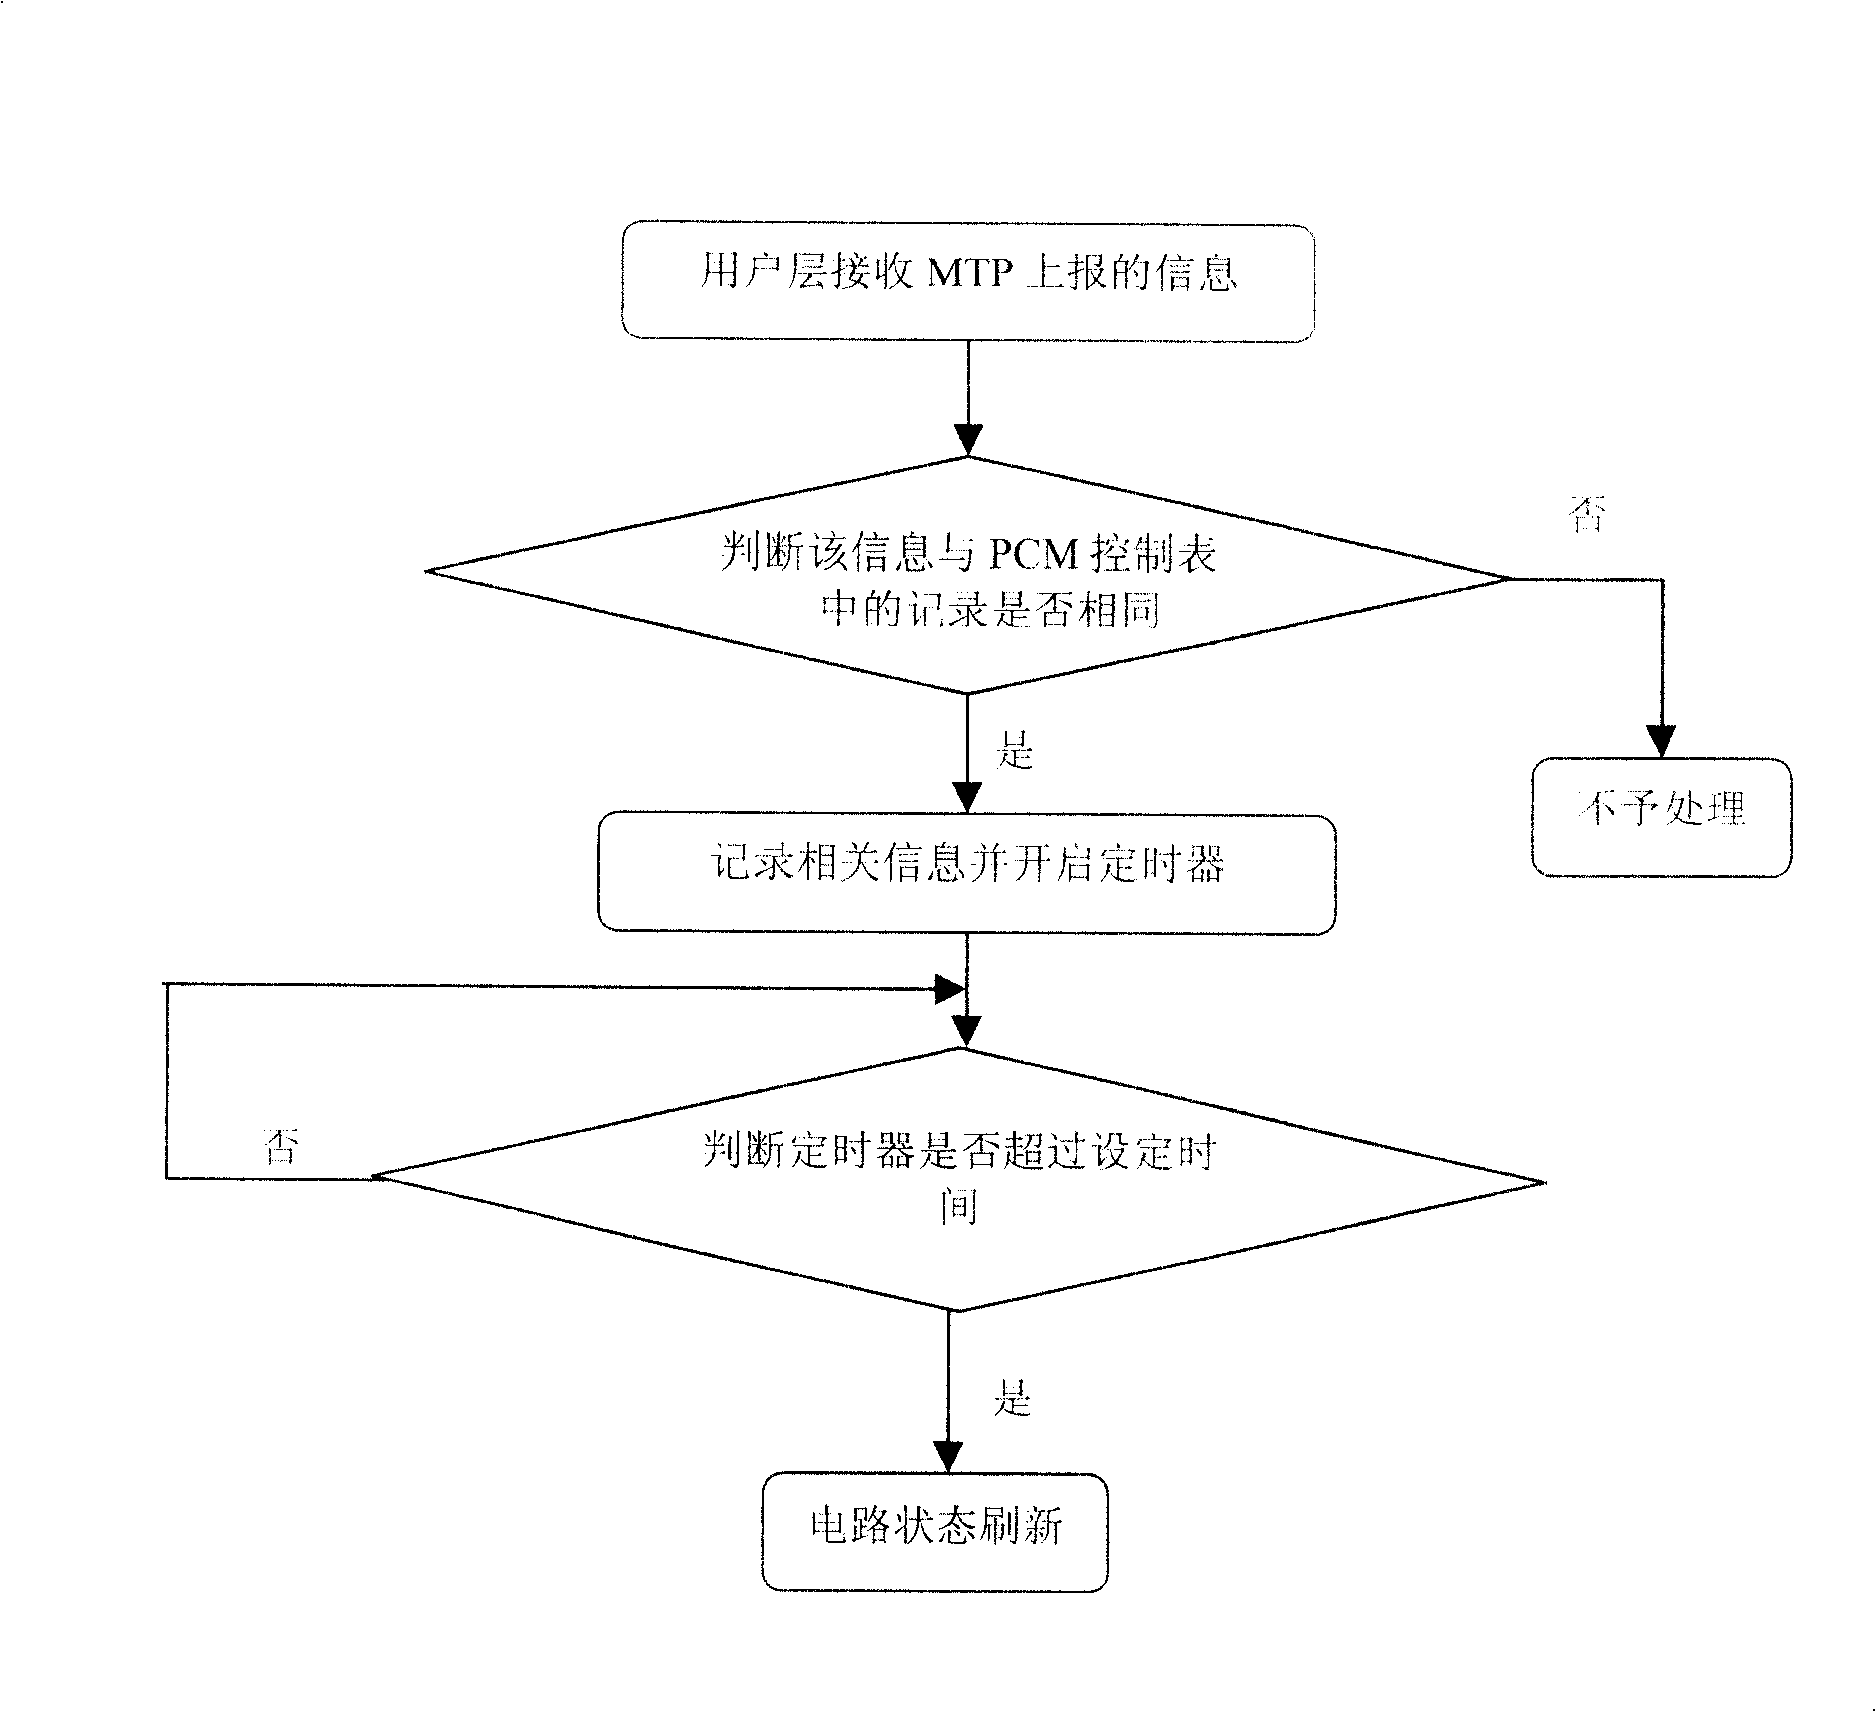 A time-sharing processing method for signaling point reporting flow